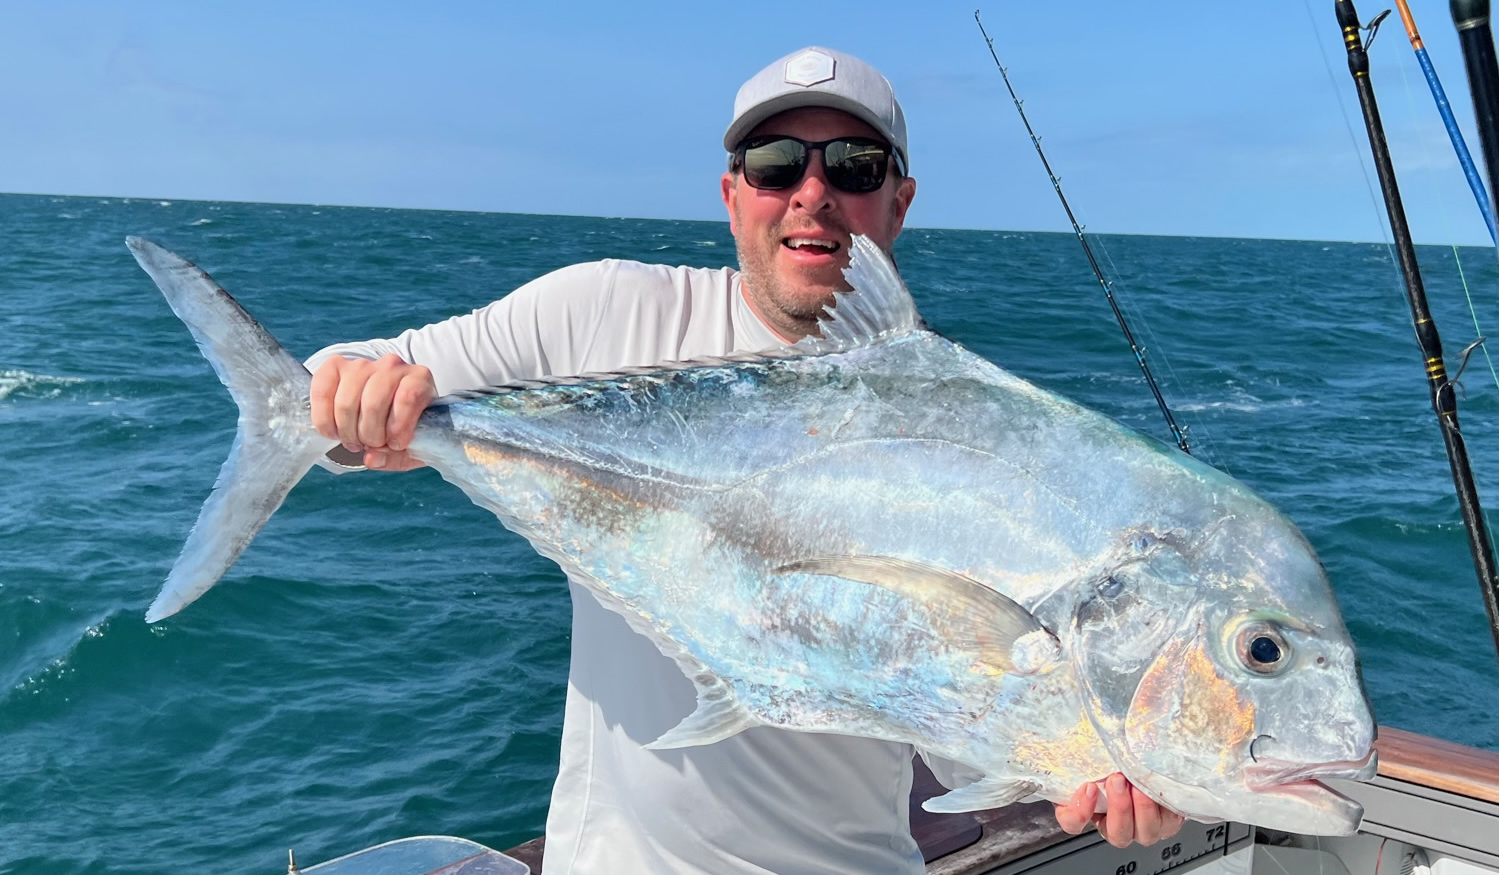 The annual Fish for Holly Sailfish tournament is right around the